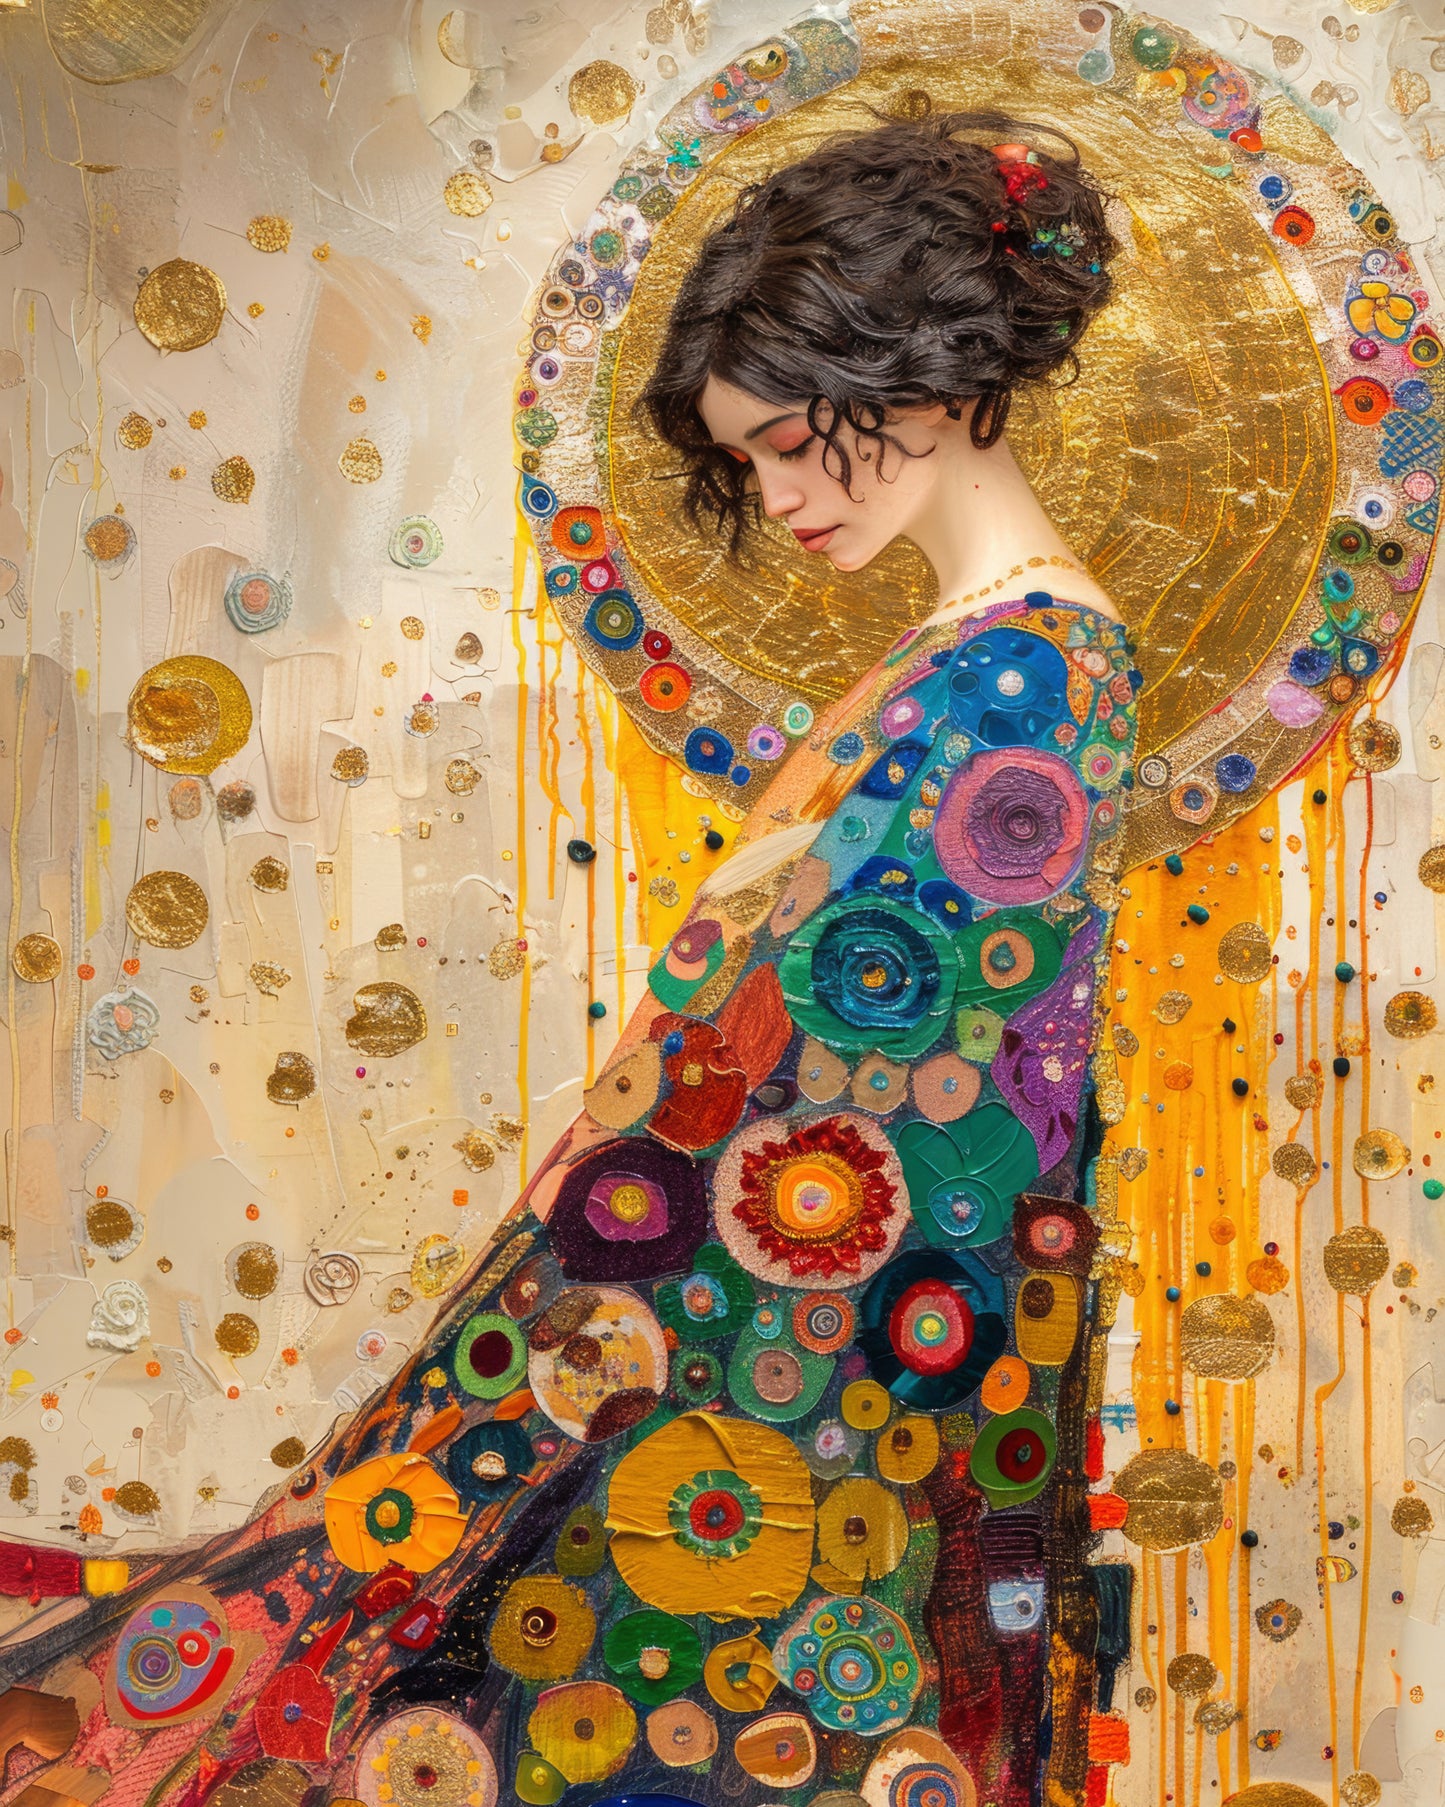 Fine art print of a woman in a colorful circular-patterned cloak from the Heart Of Gold collection.